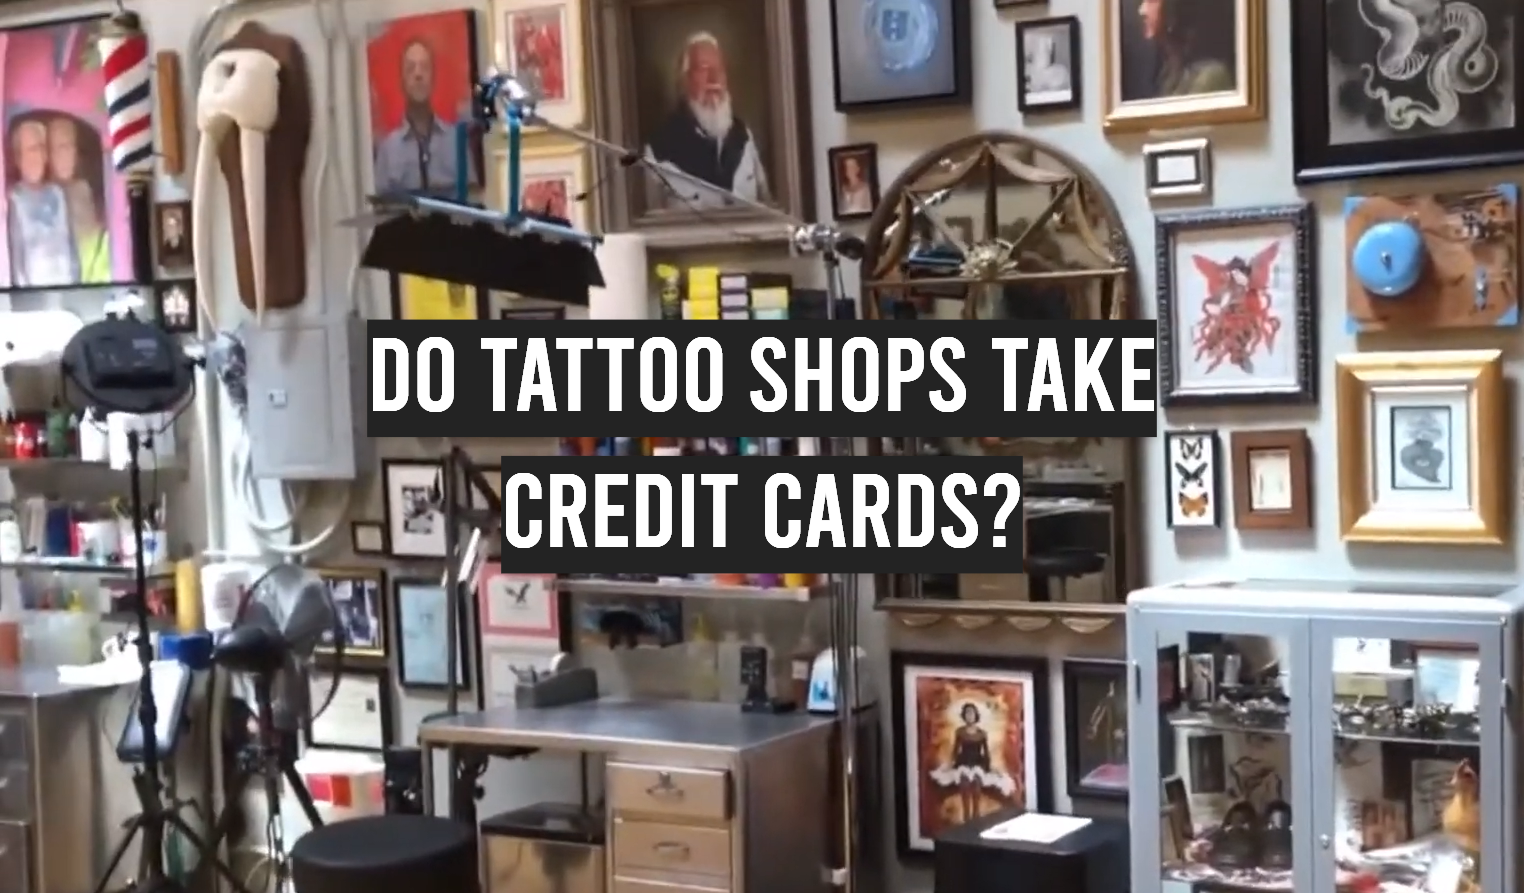 Do Tattoo Shops Take Credit Cards?